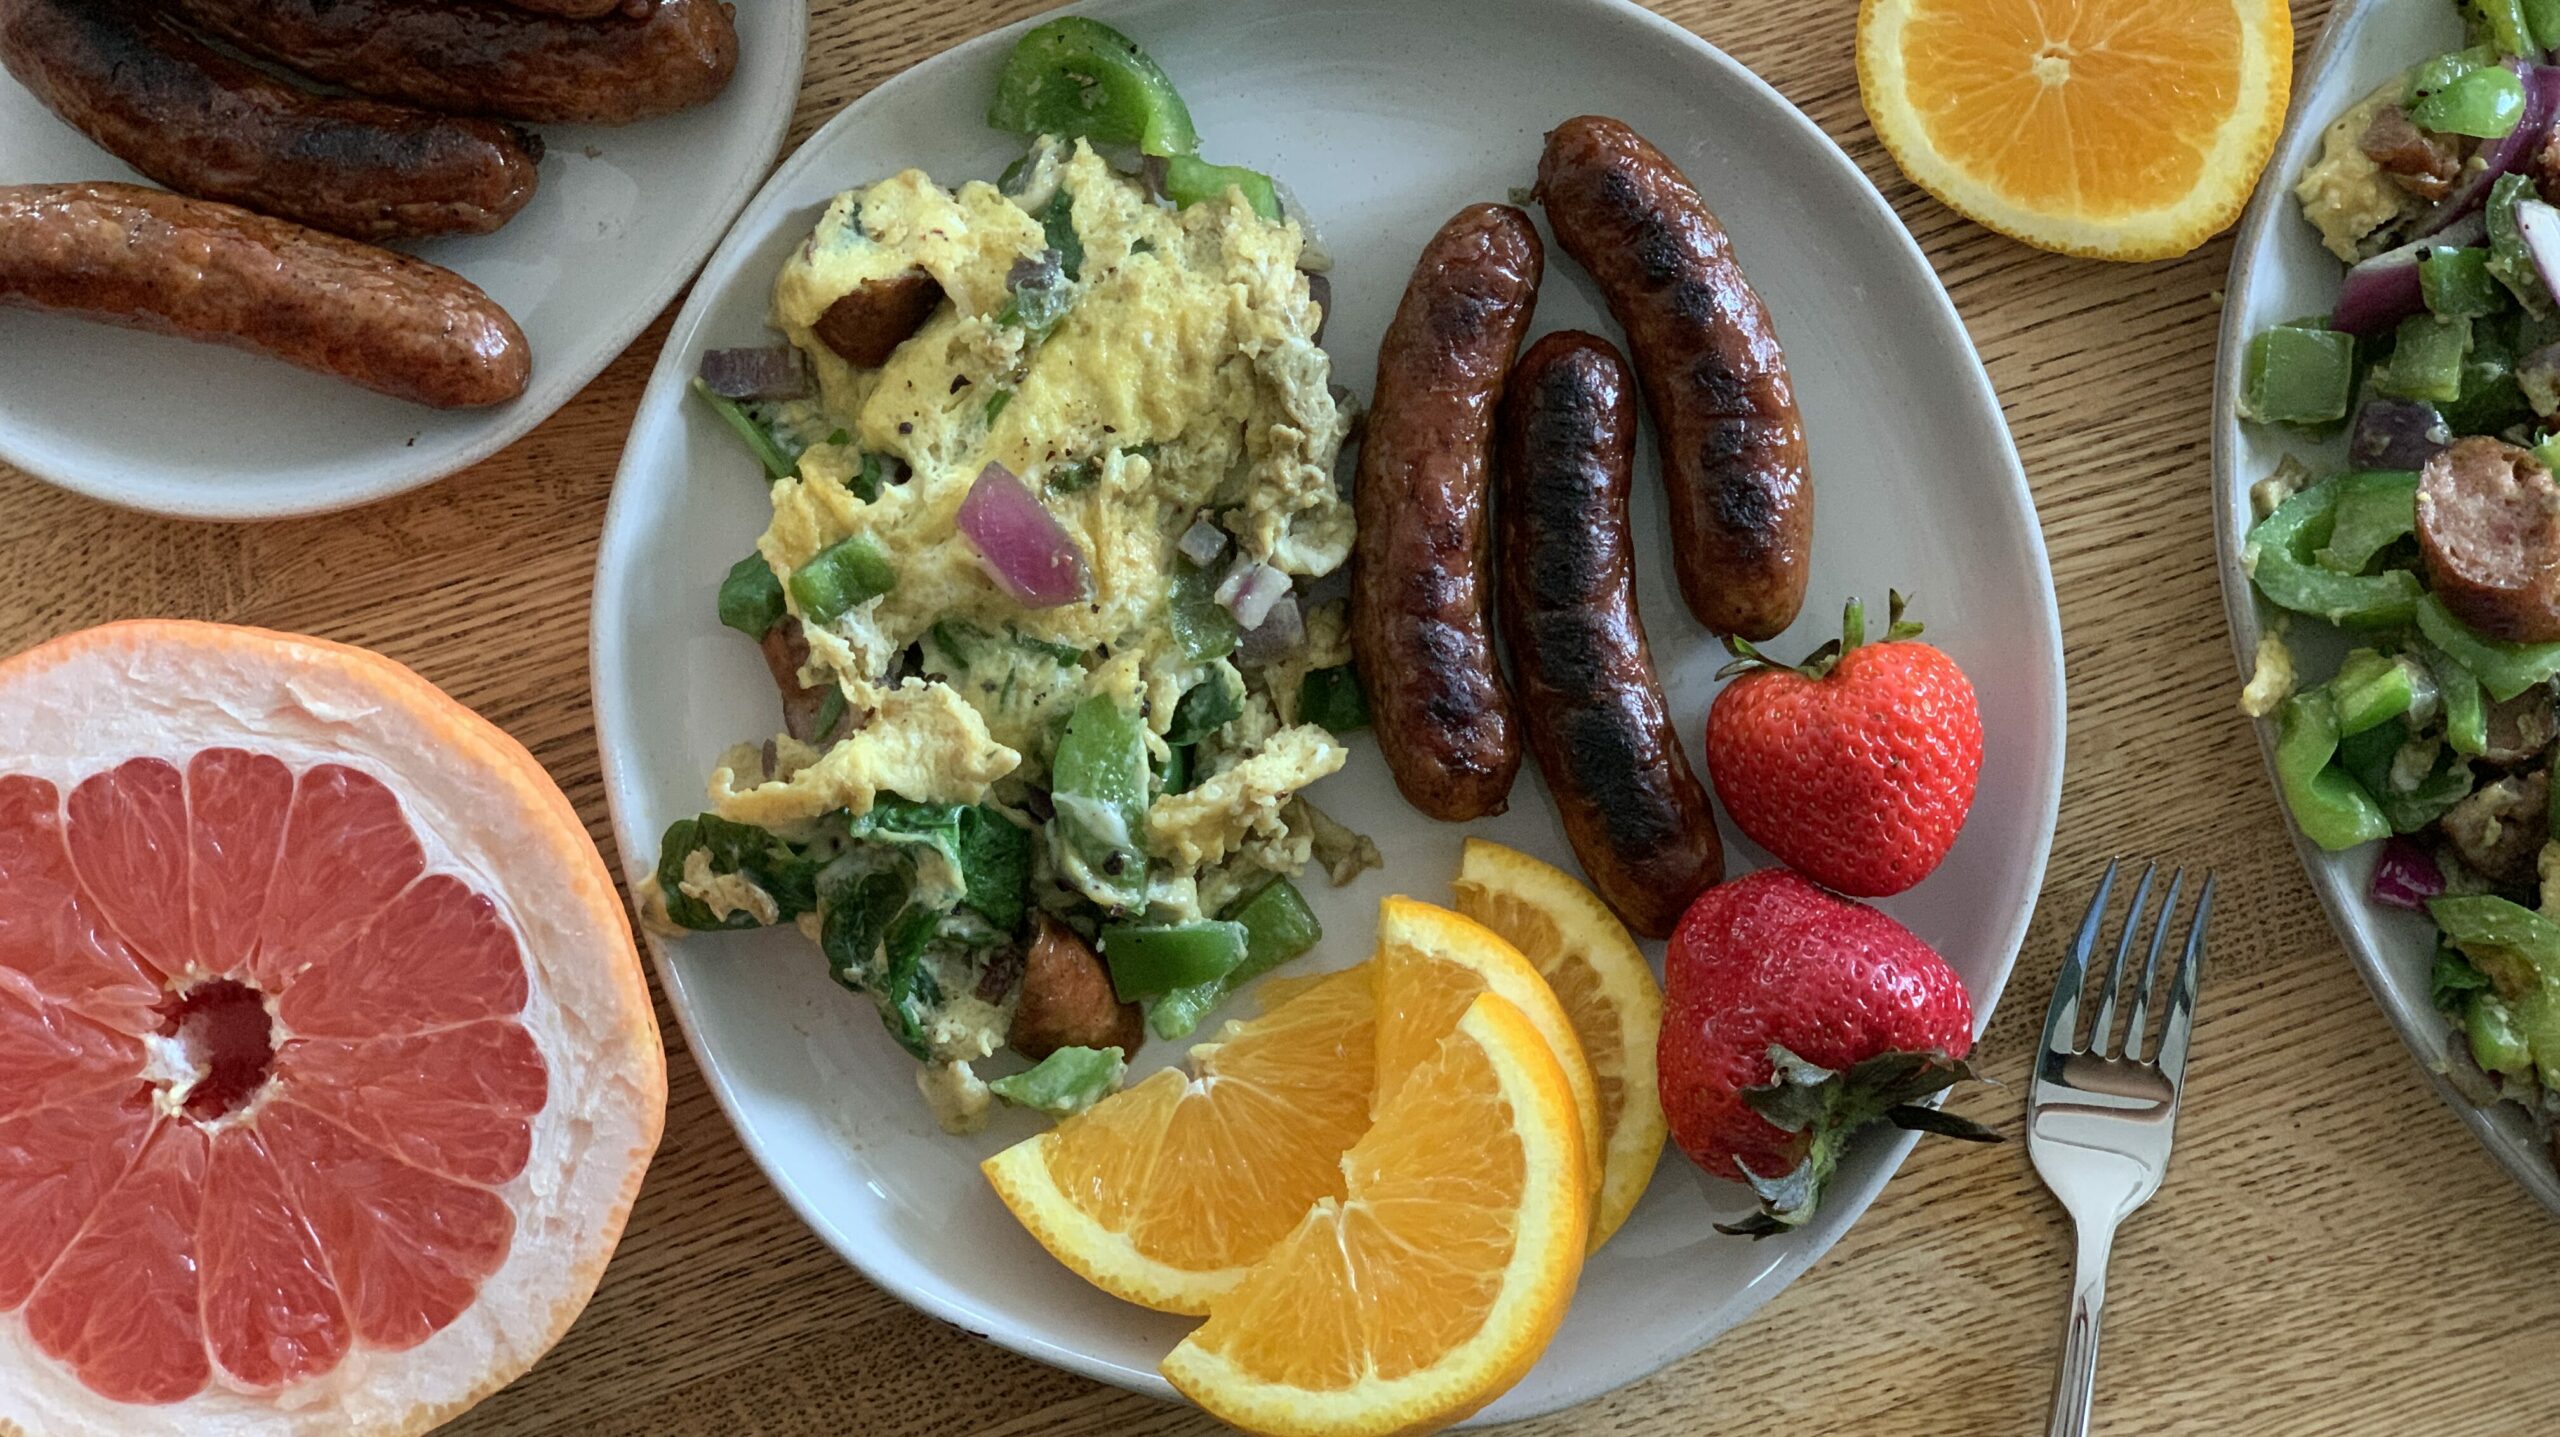 light grey plate with eggs and green pepper, charred sausage links, strawberries, orange slices, and half a grapefruit. One shiny fork. 